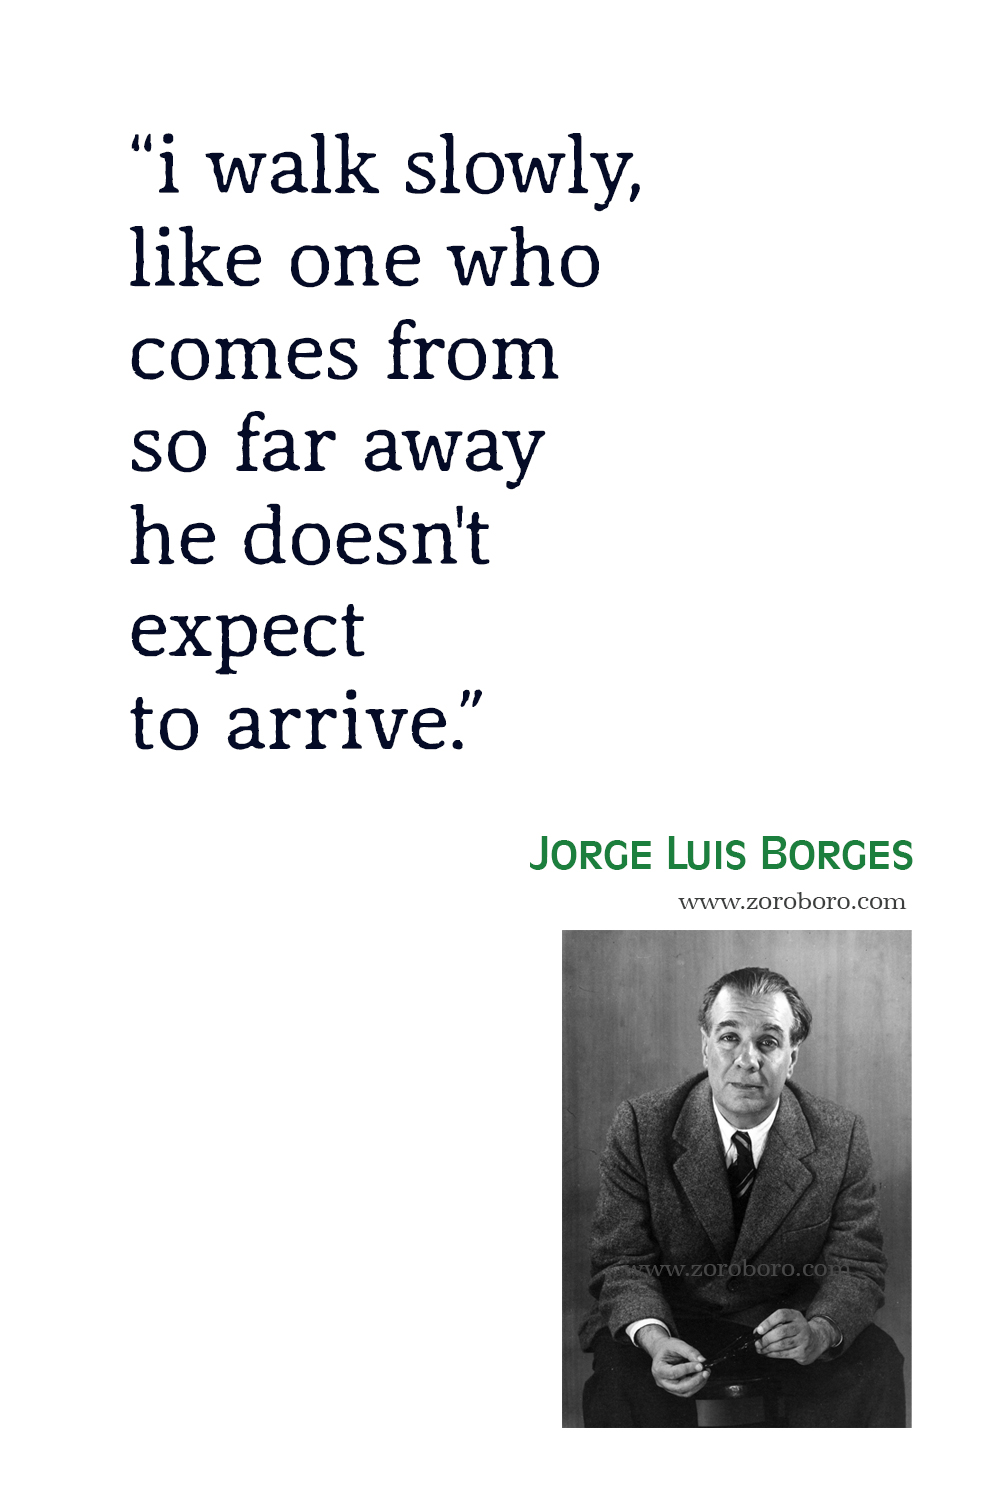 Jorge Luis Borges Quotes, Jorge Luis Borges, Labyrinths: Selected Stories & Other Writings, Jorge Luis Borges Poems, Books, Jorge Luis Borges Poetry.